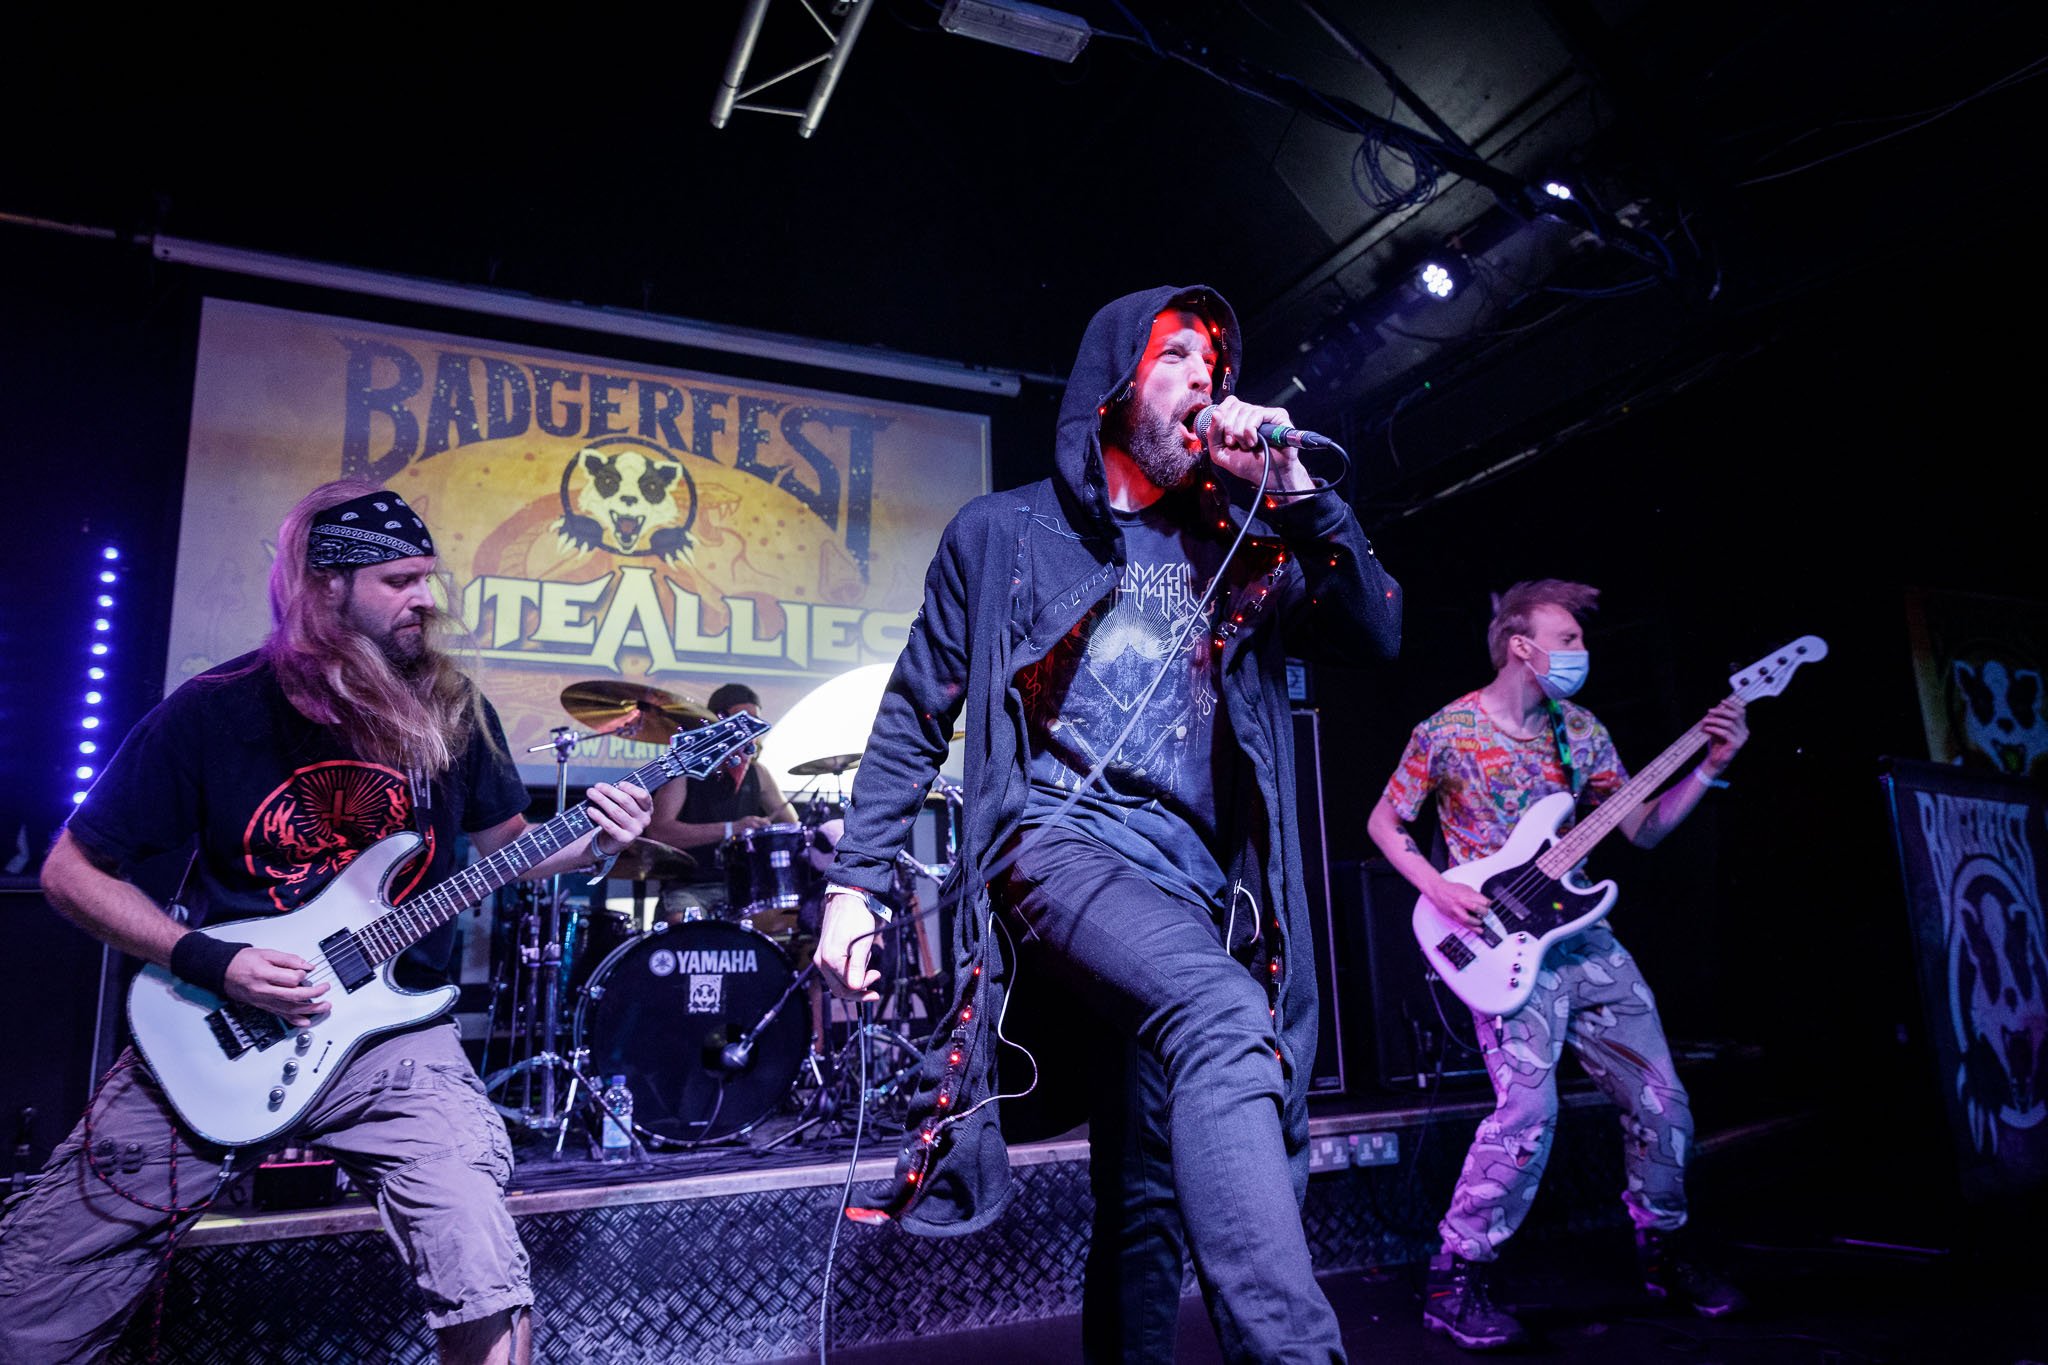 Bruteallies at the Badgerfest at the Bread Shed in Manchester on